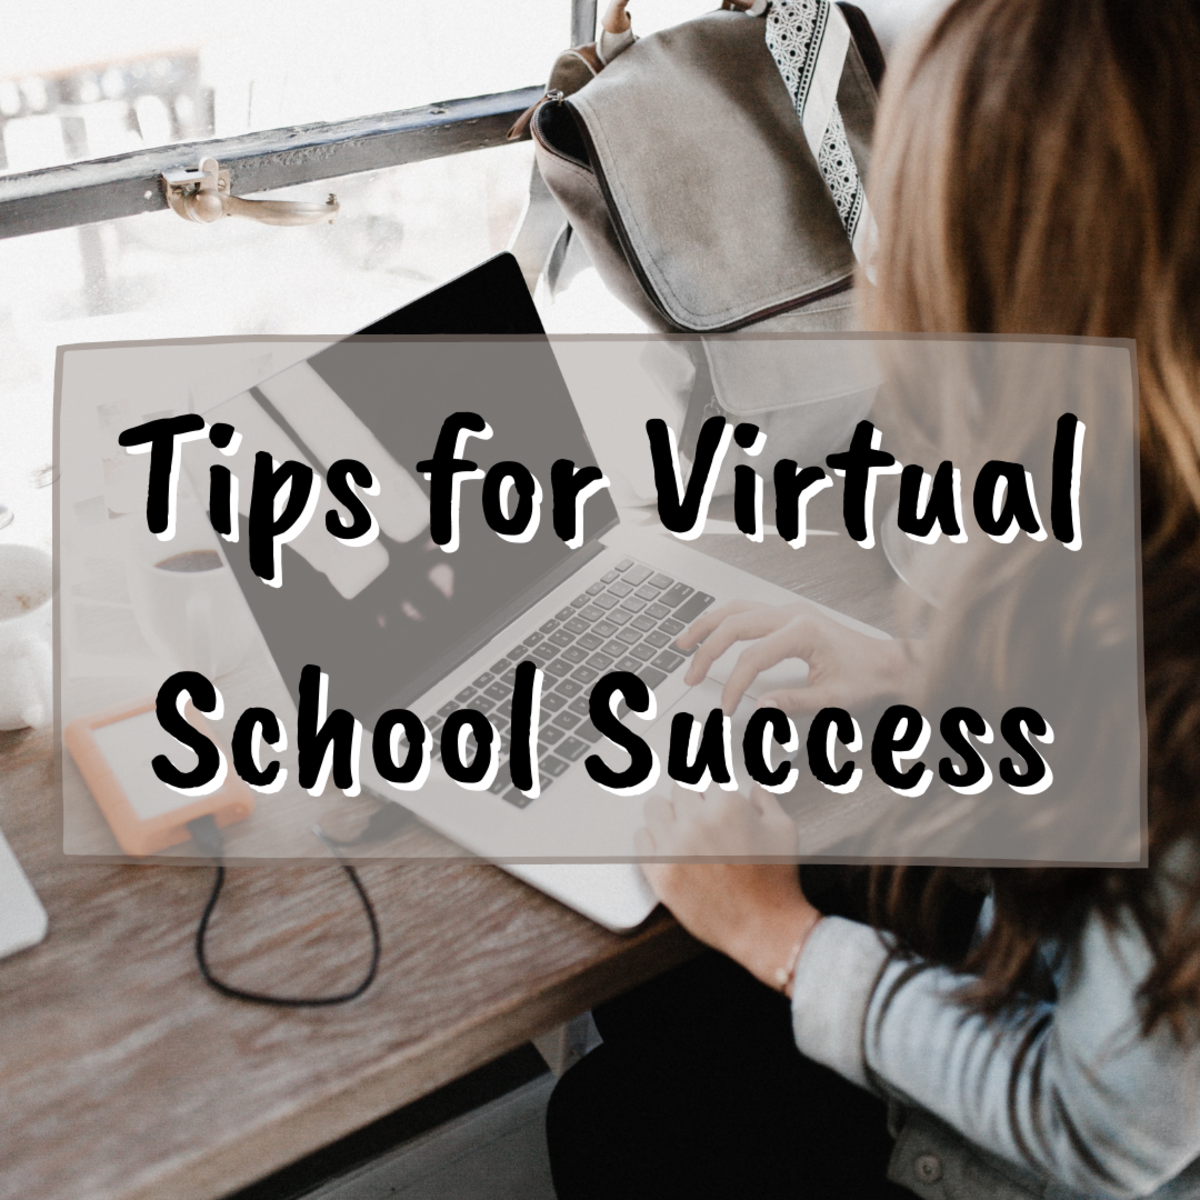 Read on to learn 5 tips to help ensure your child's success in virtual school.